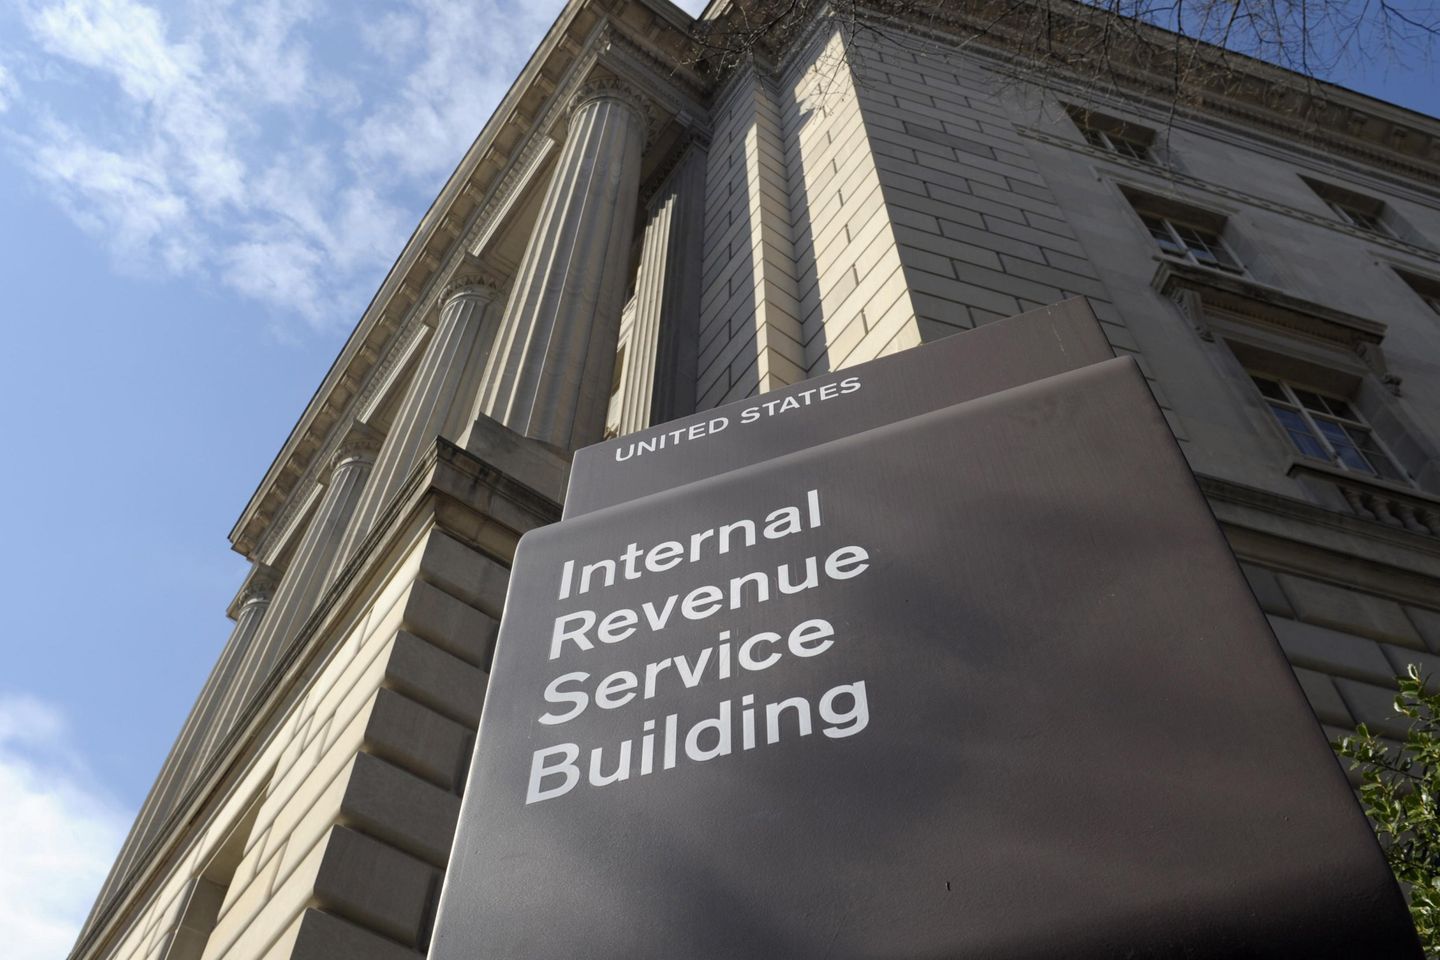 The IRS has advice about tax questions over the holiday